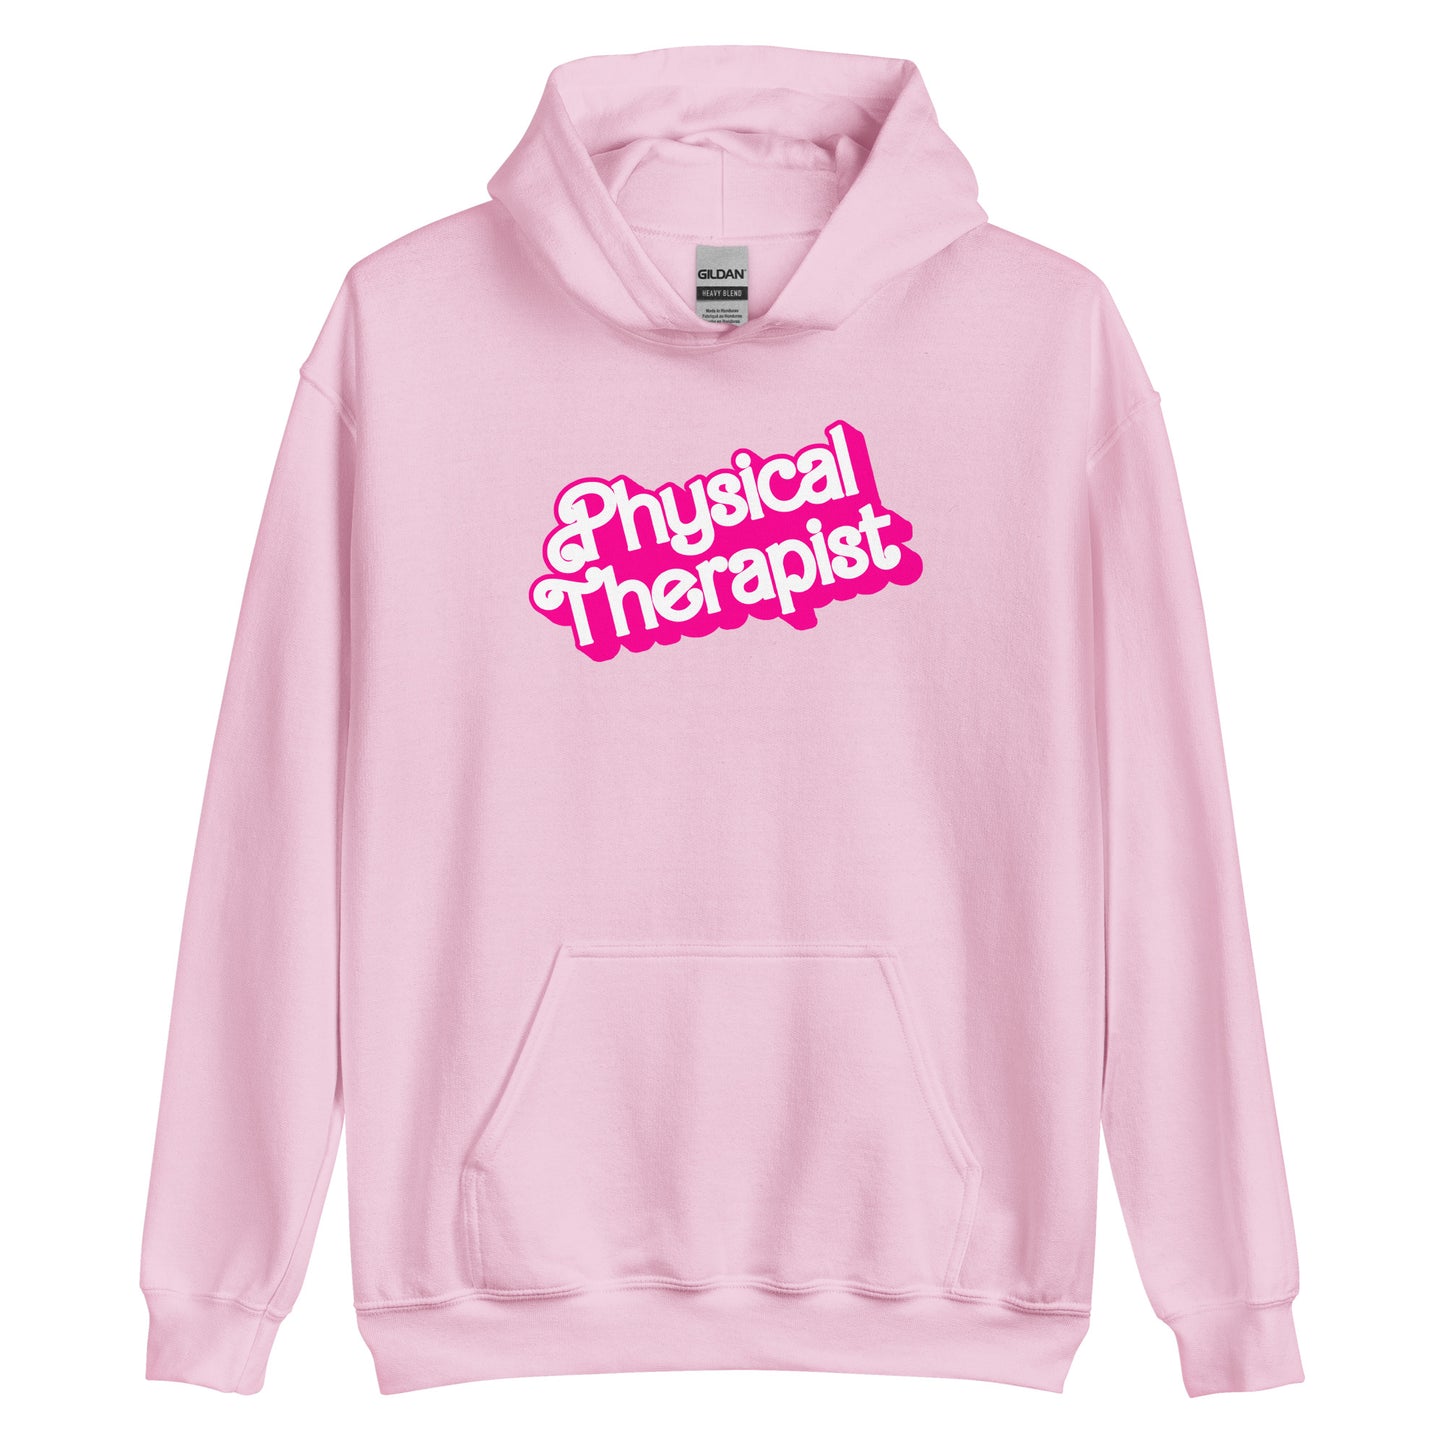 Barbie Physical Therapist Hoodie